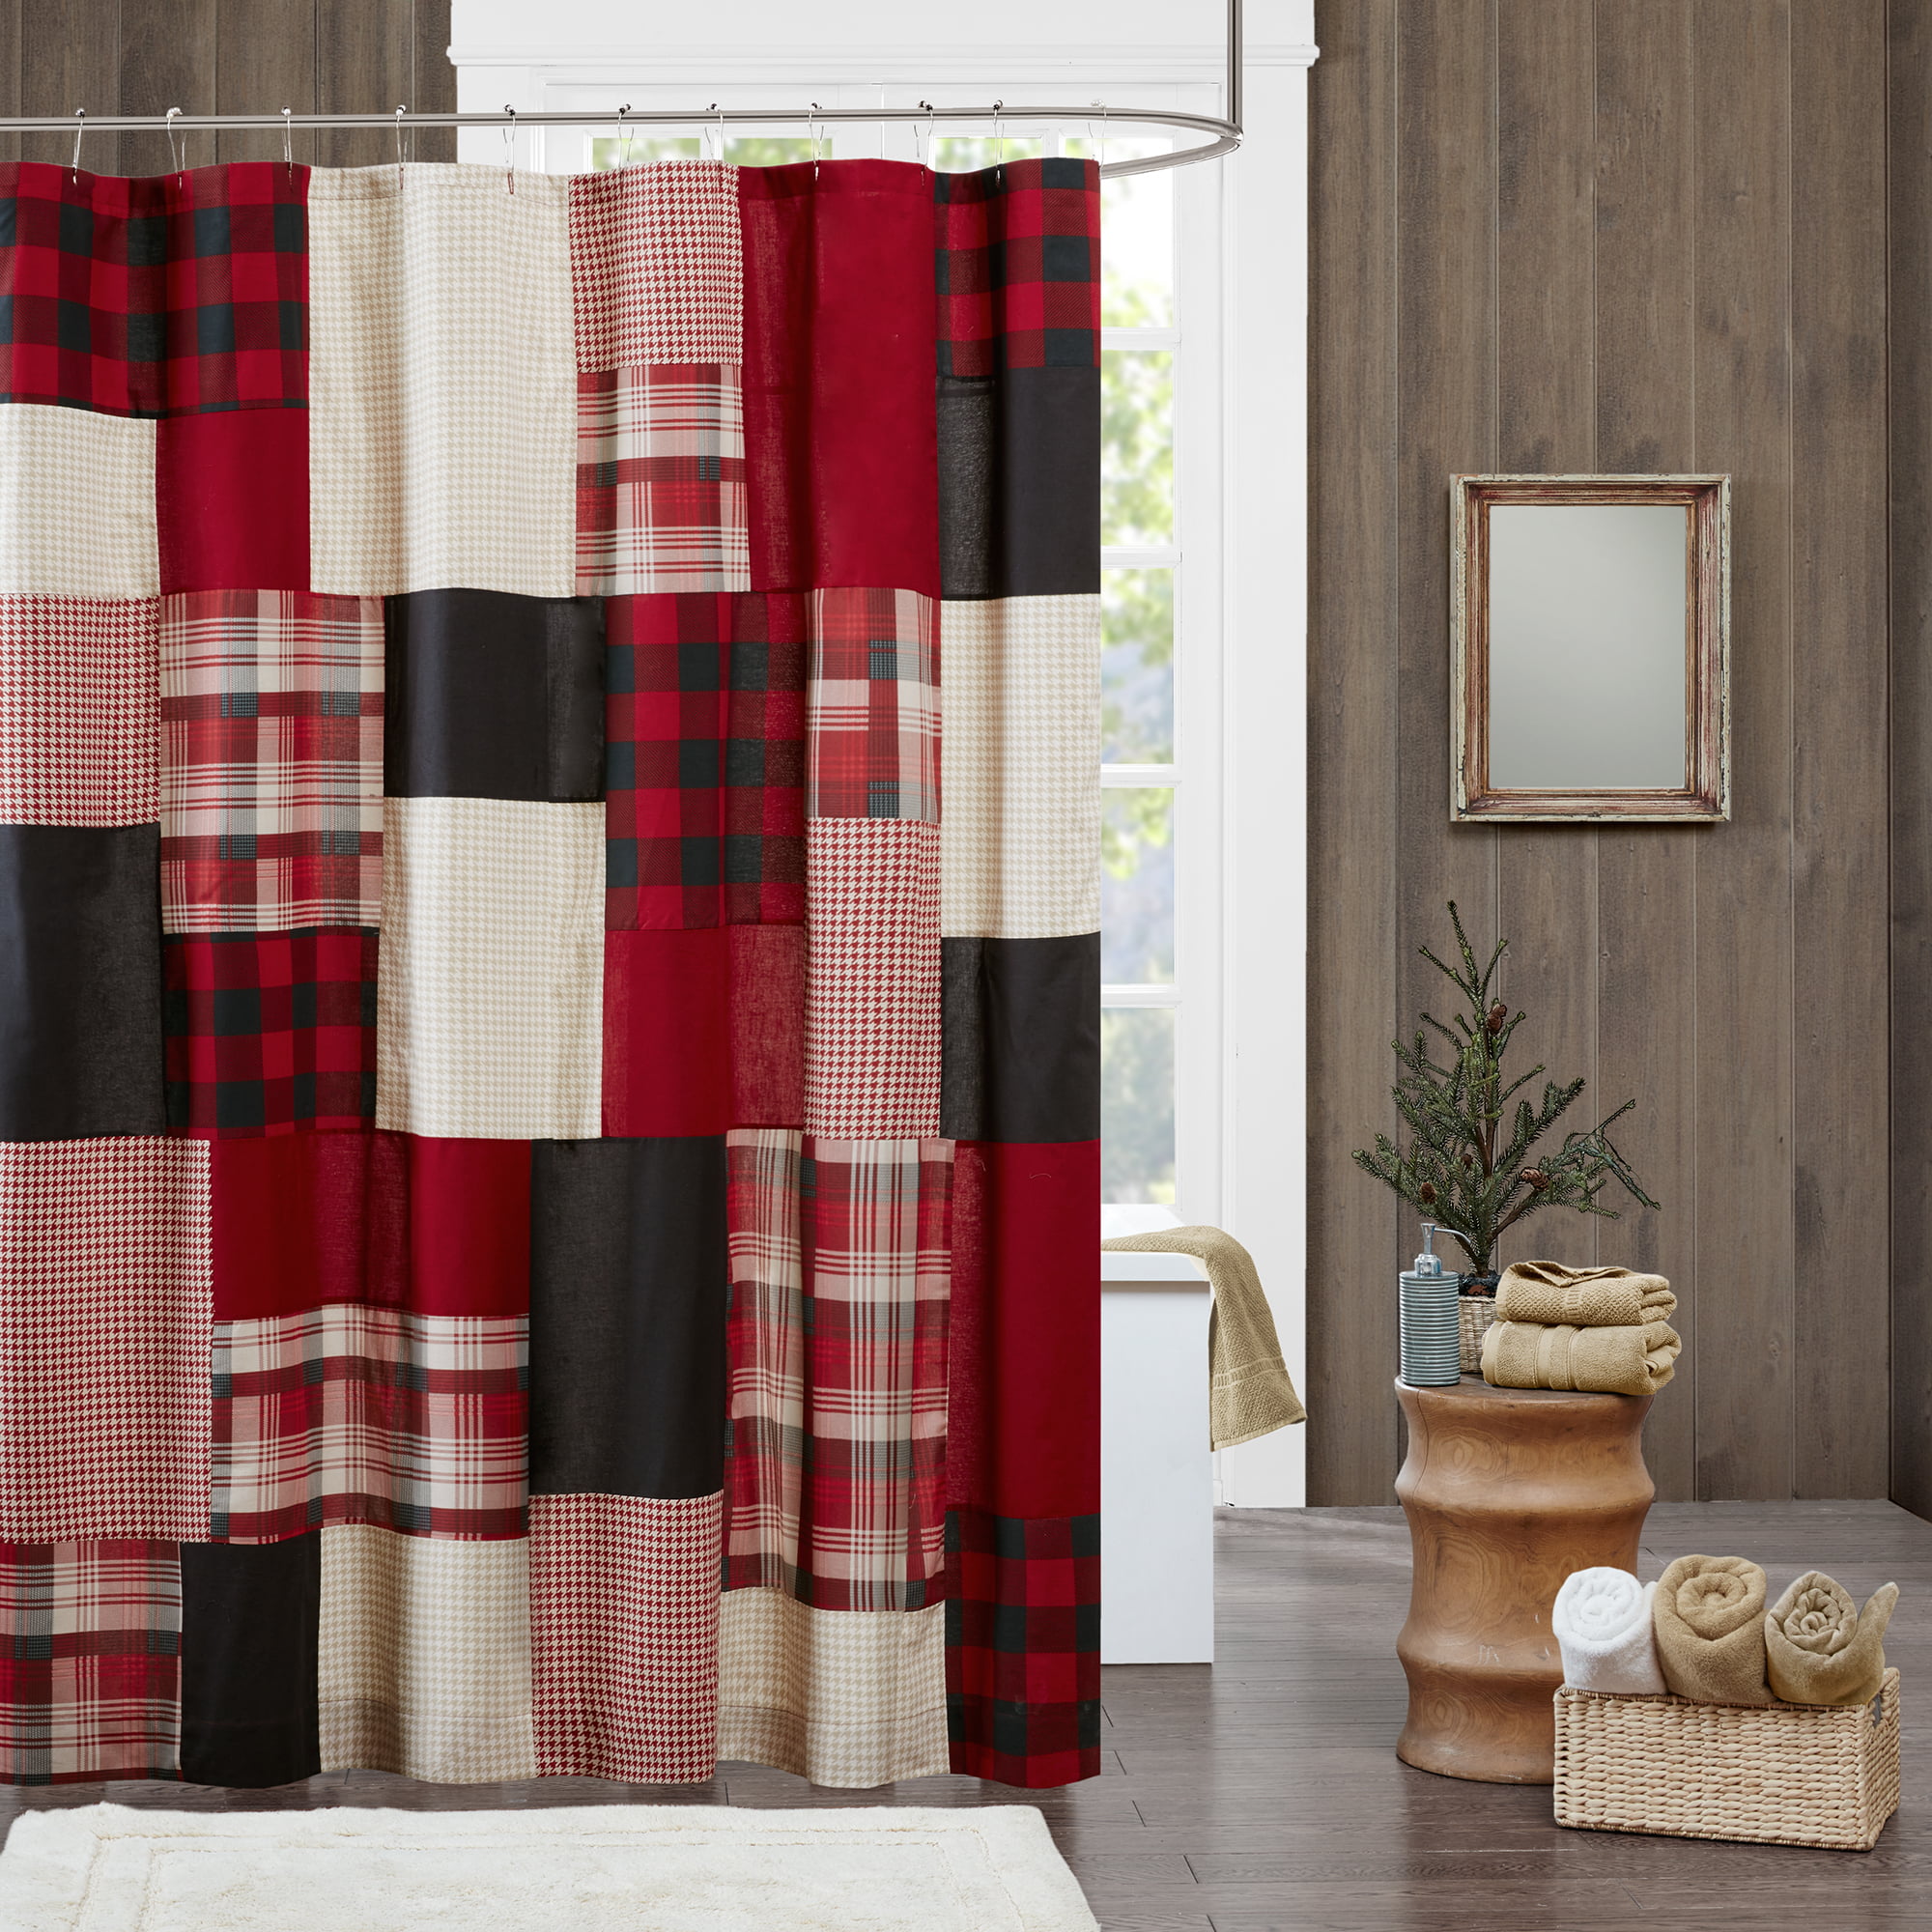 Get Buck Naked Black Red Plaid Pattern Shower Curtain Bathroom Accessory Sets 